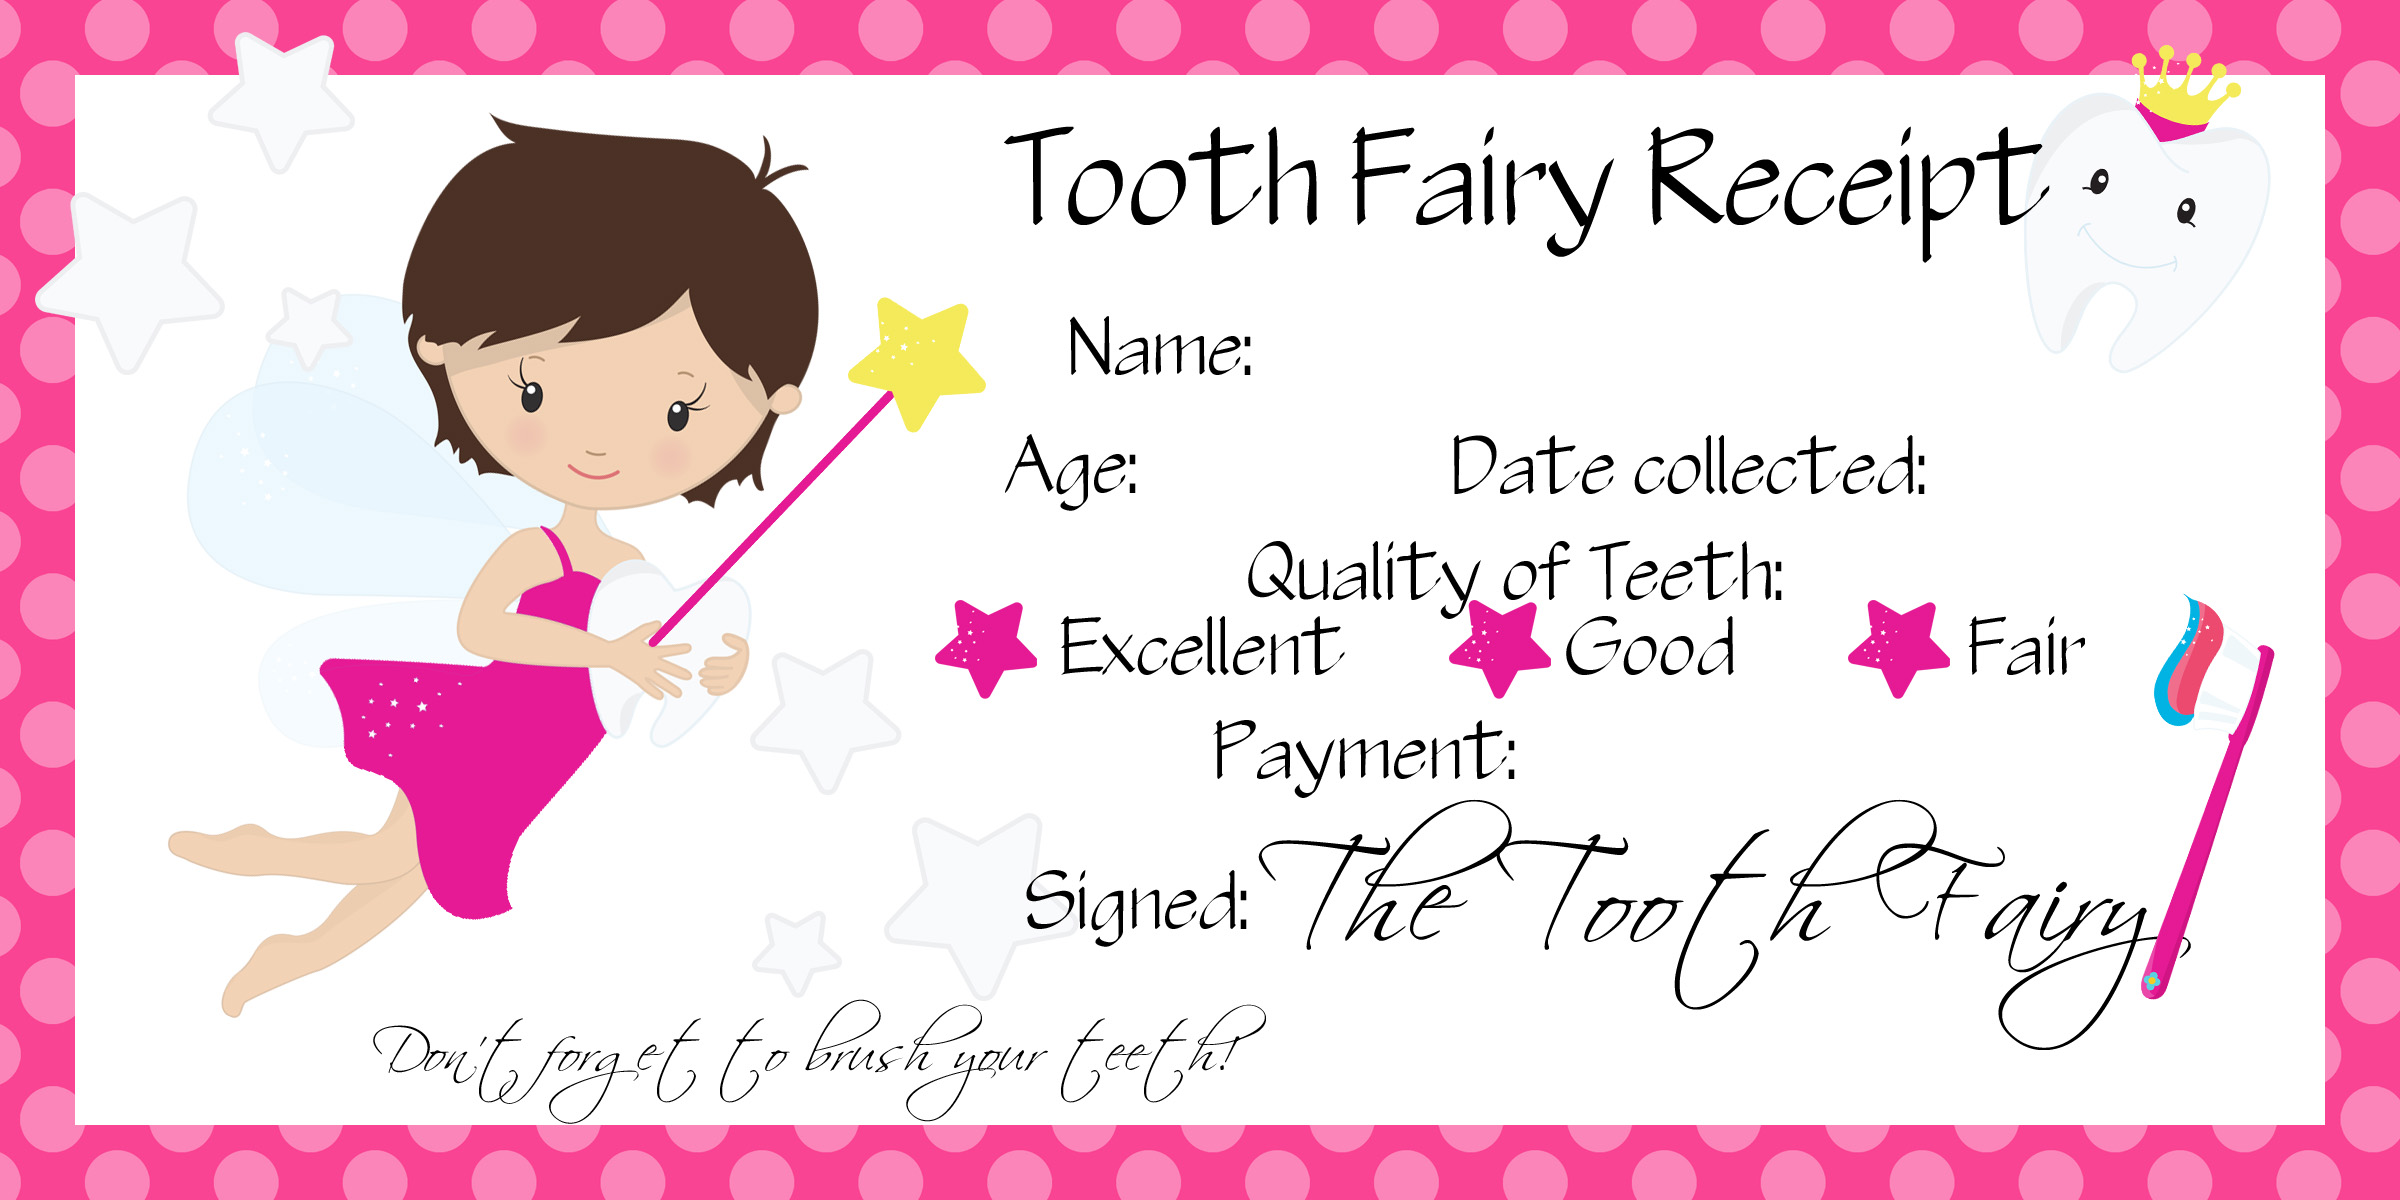 O's first lost tooth Tooth Fairy Receipt Free printable • jeni ro